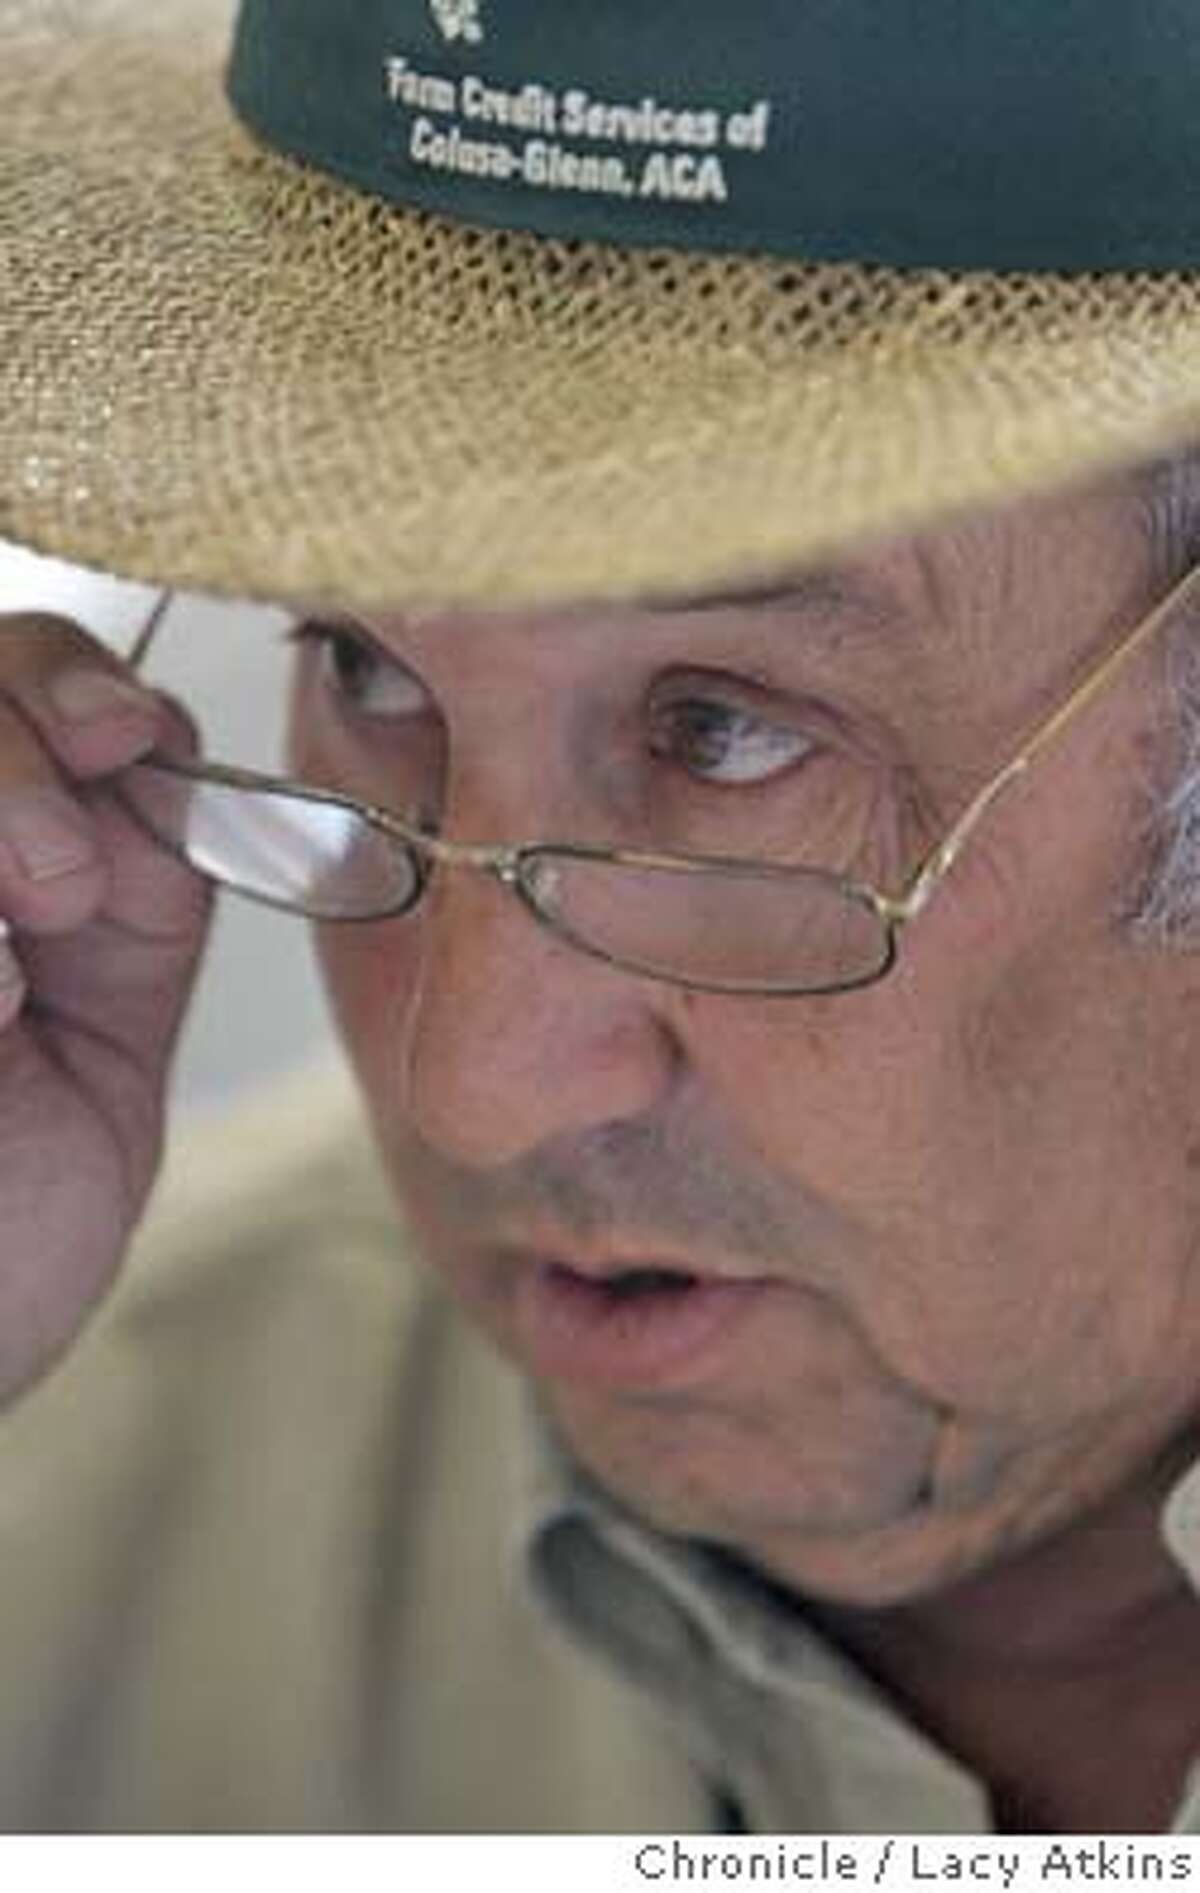 Joe Carrancho, a rice farmers state their views of the California Rice Commission approving a plan to plant genetically engineered rice, at their farms in Glenn County, April 6, 2004. LACY ATKINS / The Chronicle